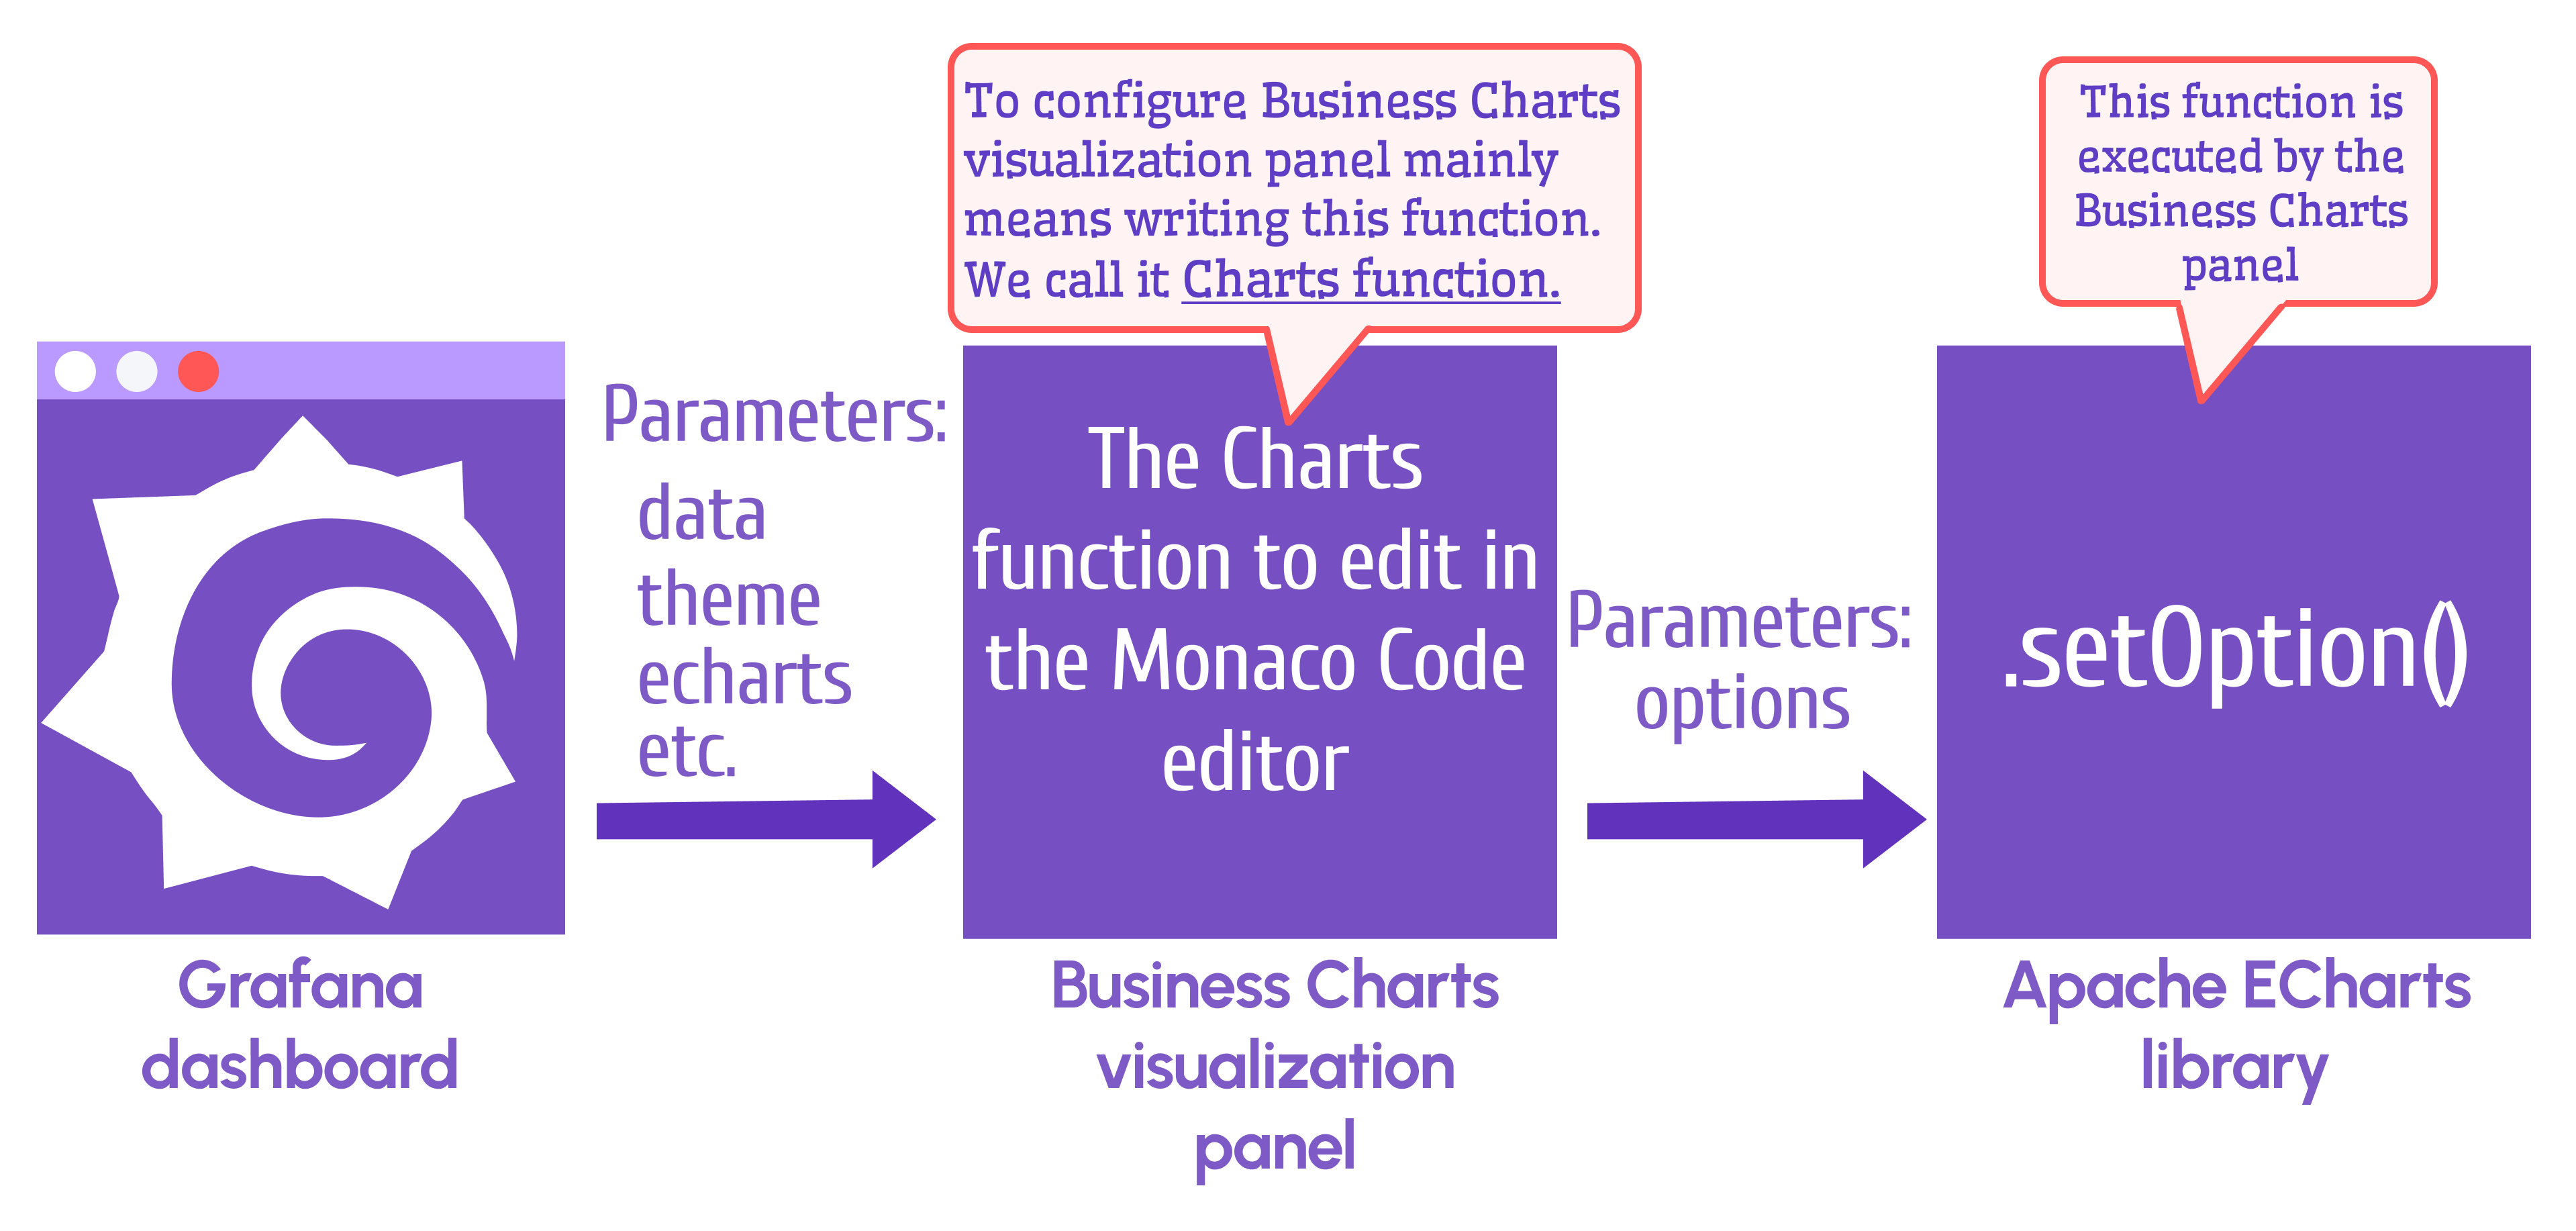 Apache ECharts Panel uses the Apache ECharts library and specified parameters to generate charts.